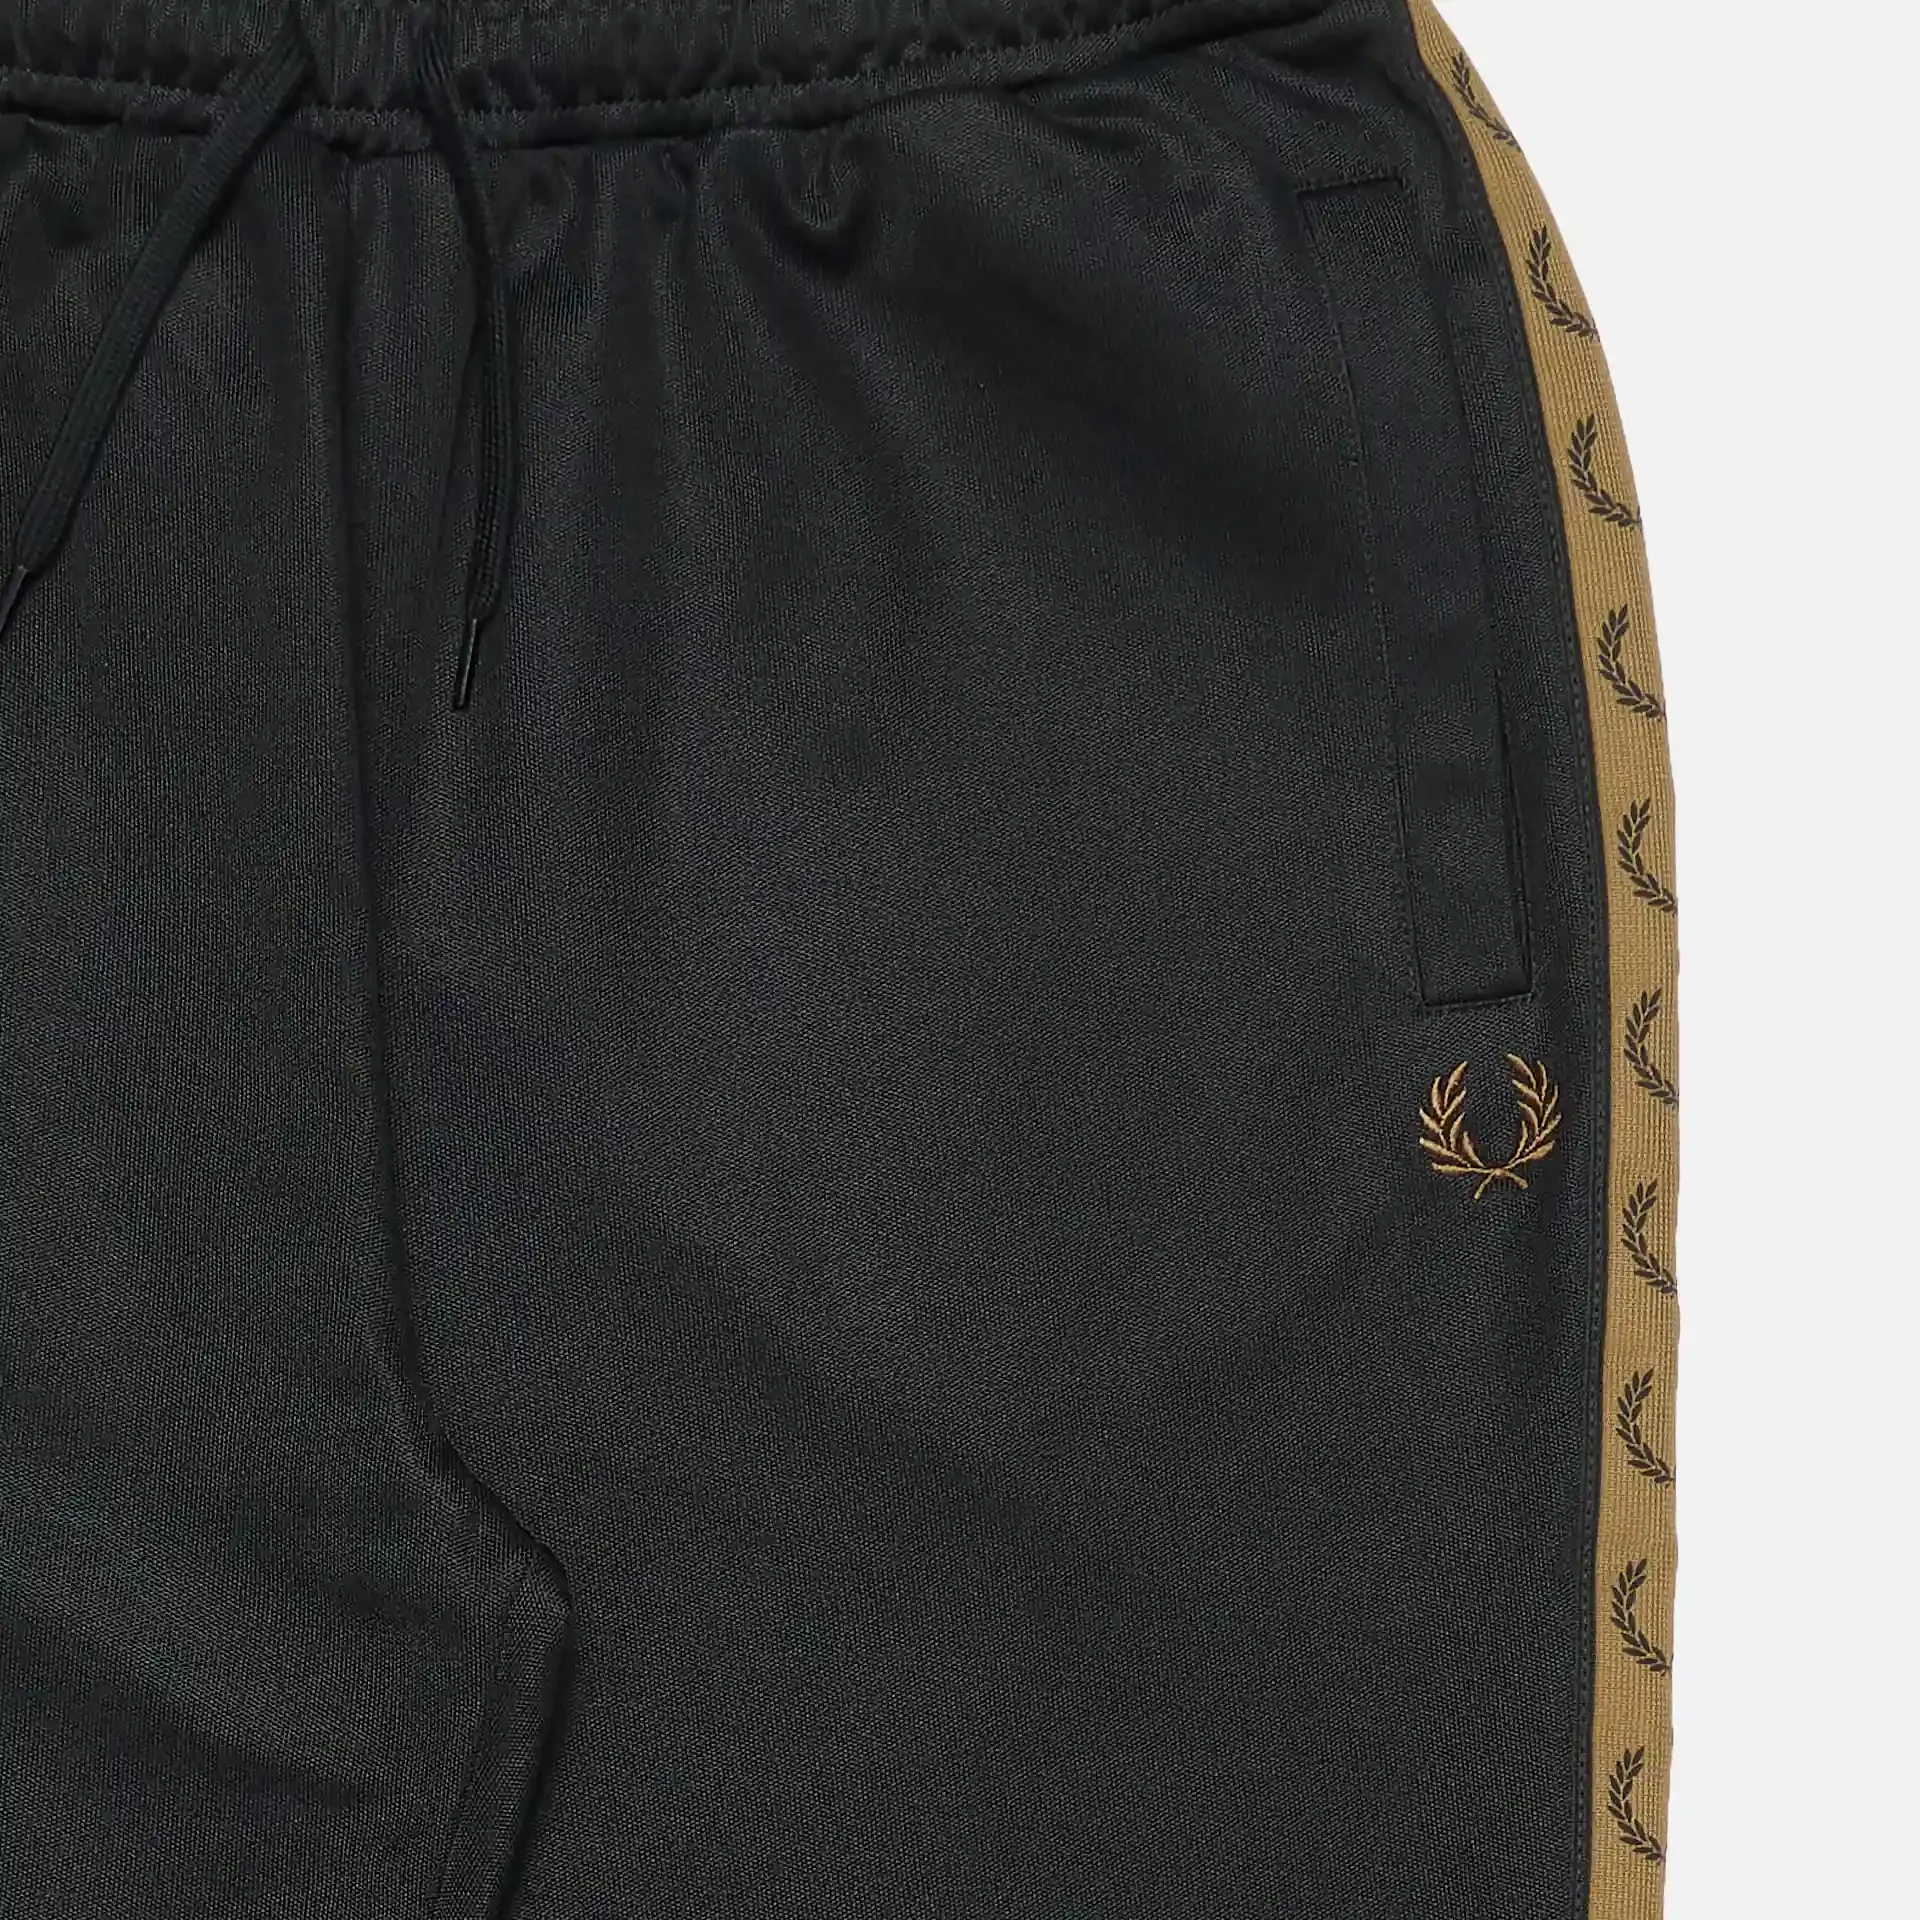 Fred Perry Seasonal Taped Track Pant Black/Shaded Stone